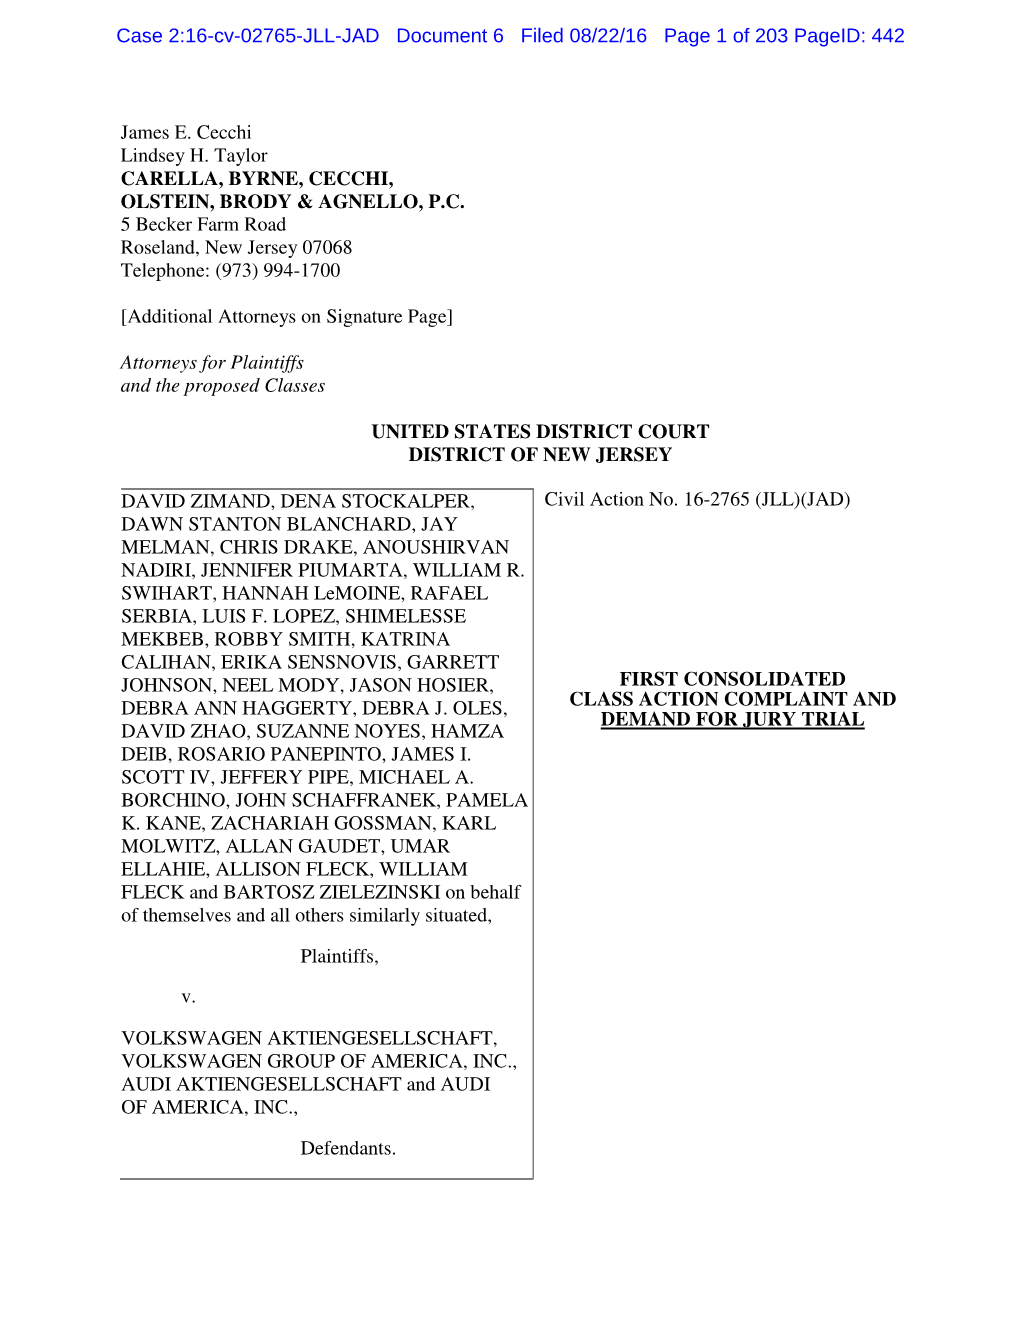 First Consolidated Class Action Complaint and Demand for Jury Trial